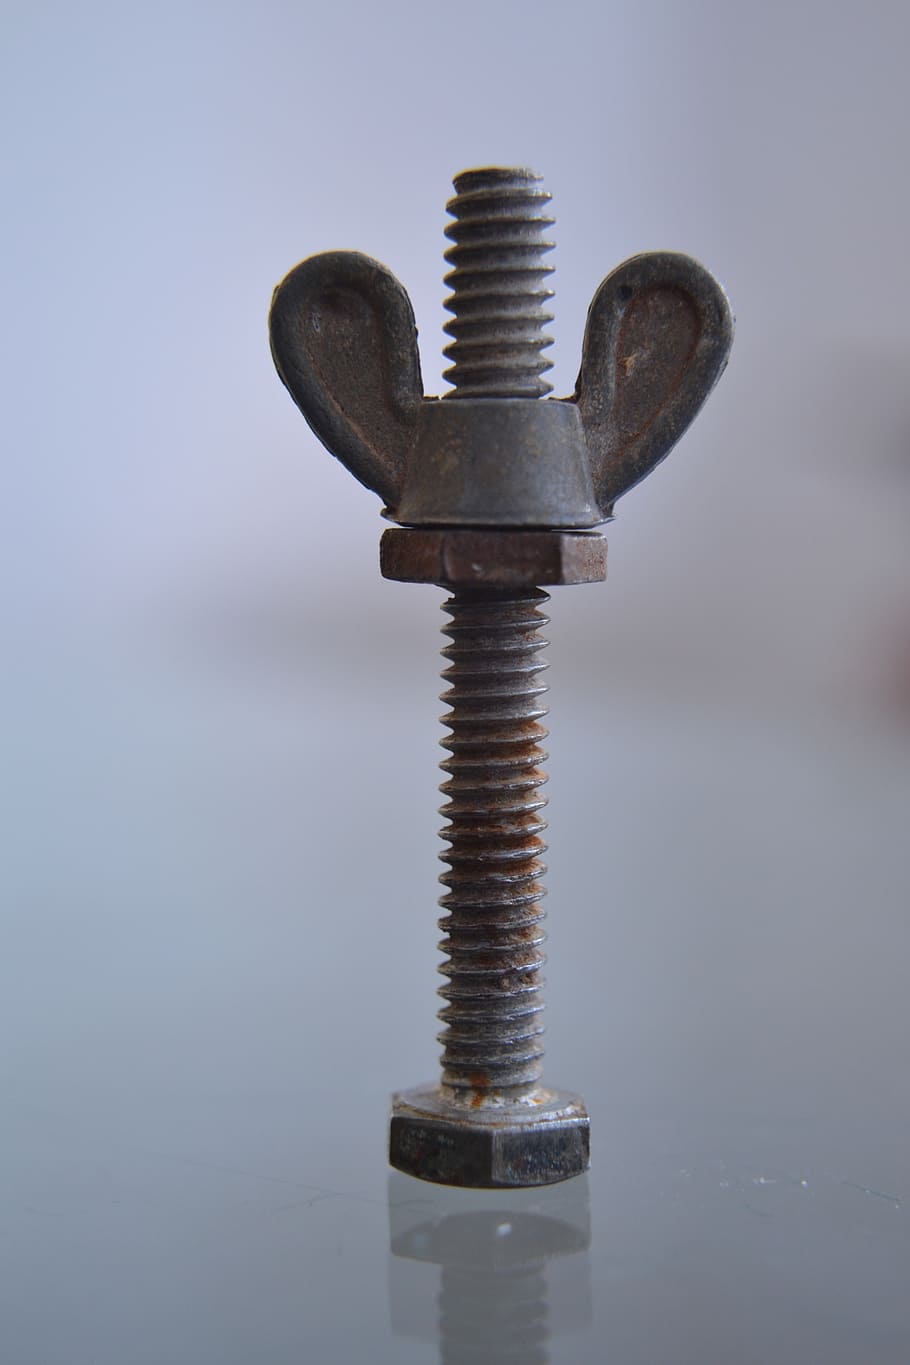 screw, wing nut, spiral, tool, useful, joinery, utility, work, mobile, carpenter